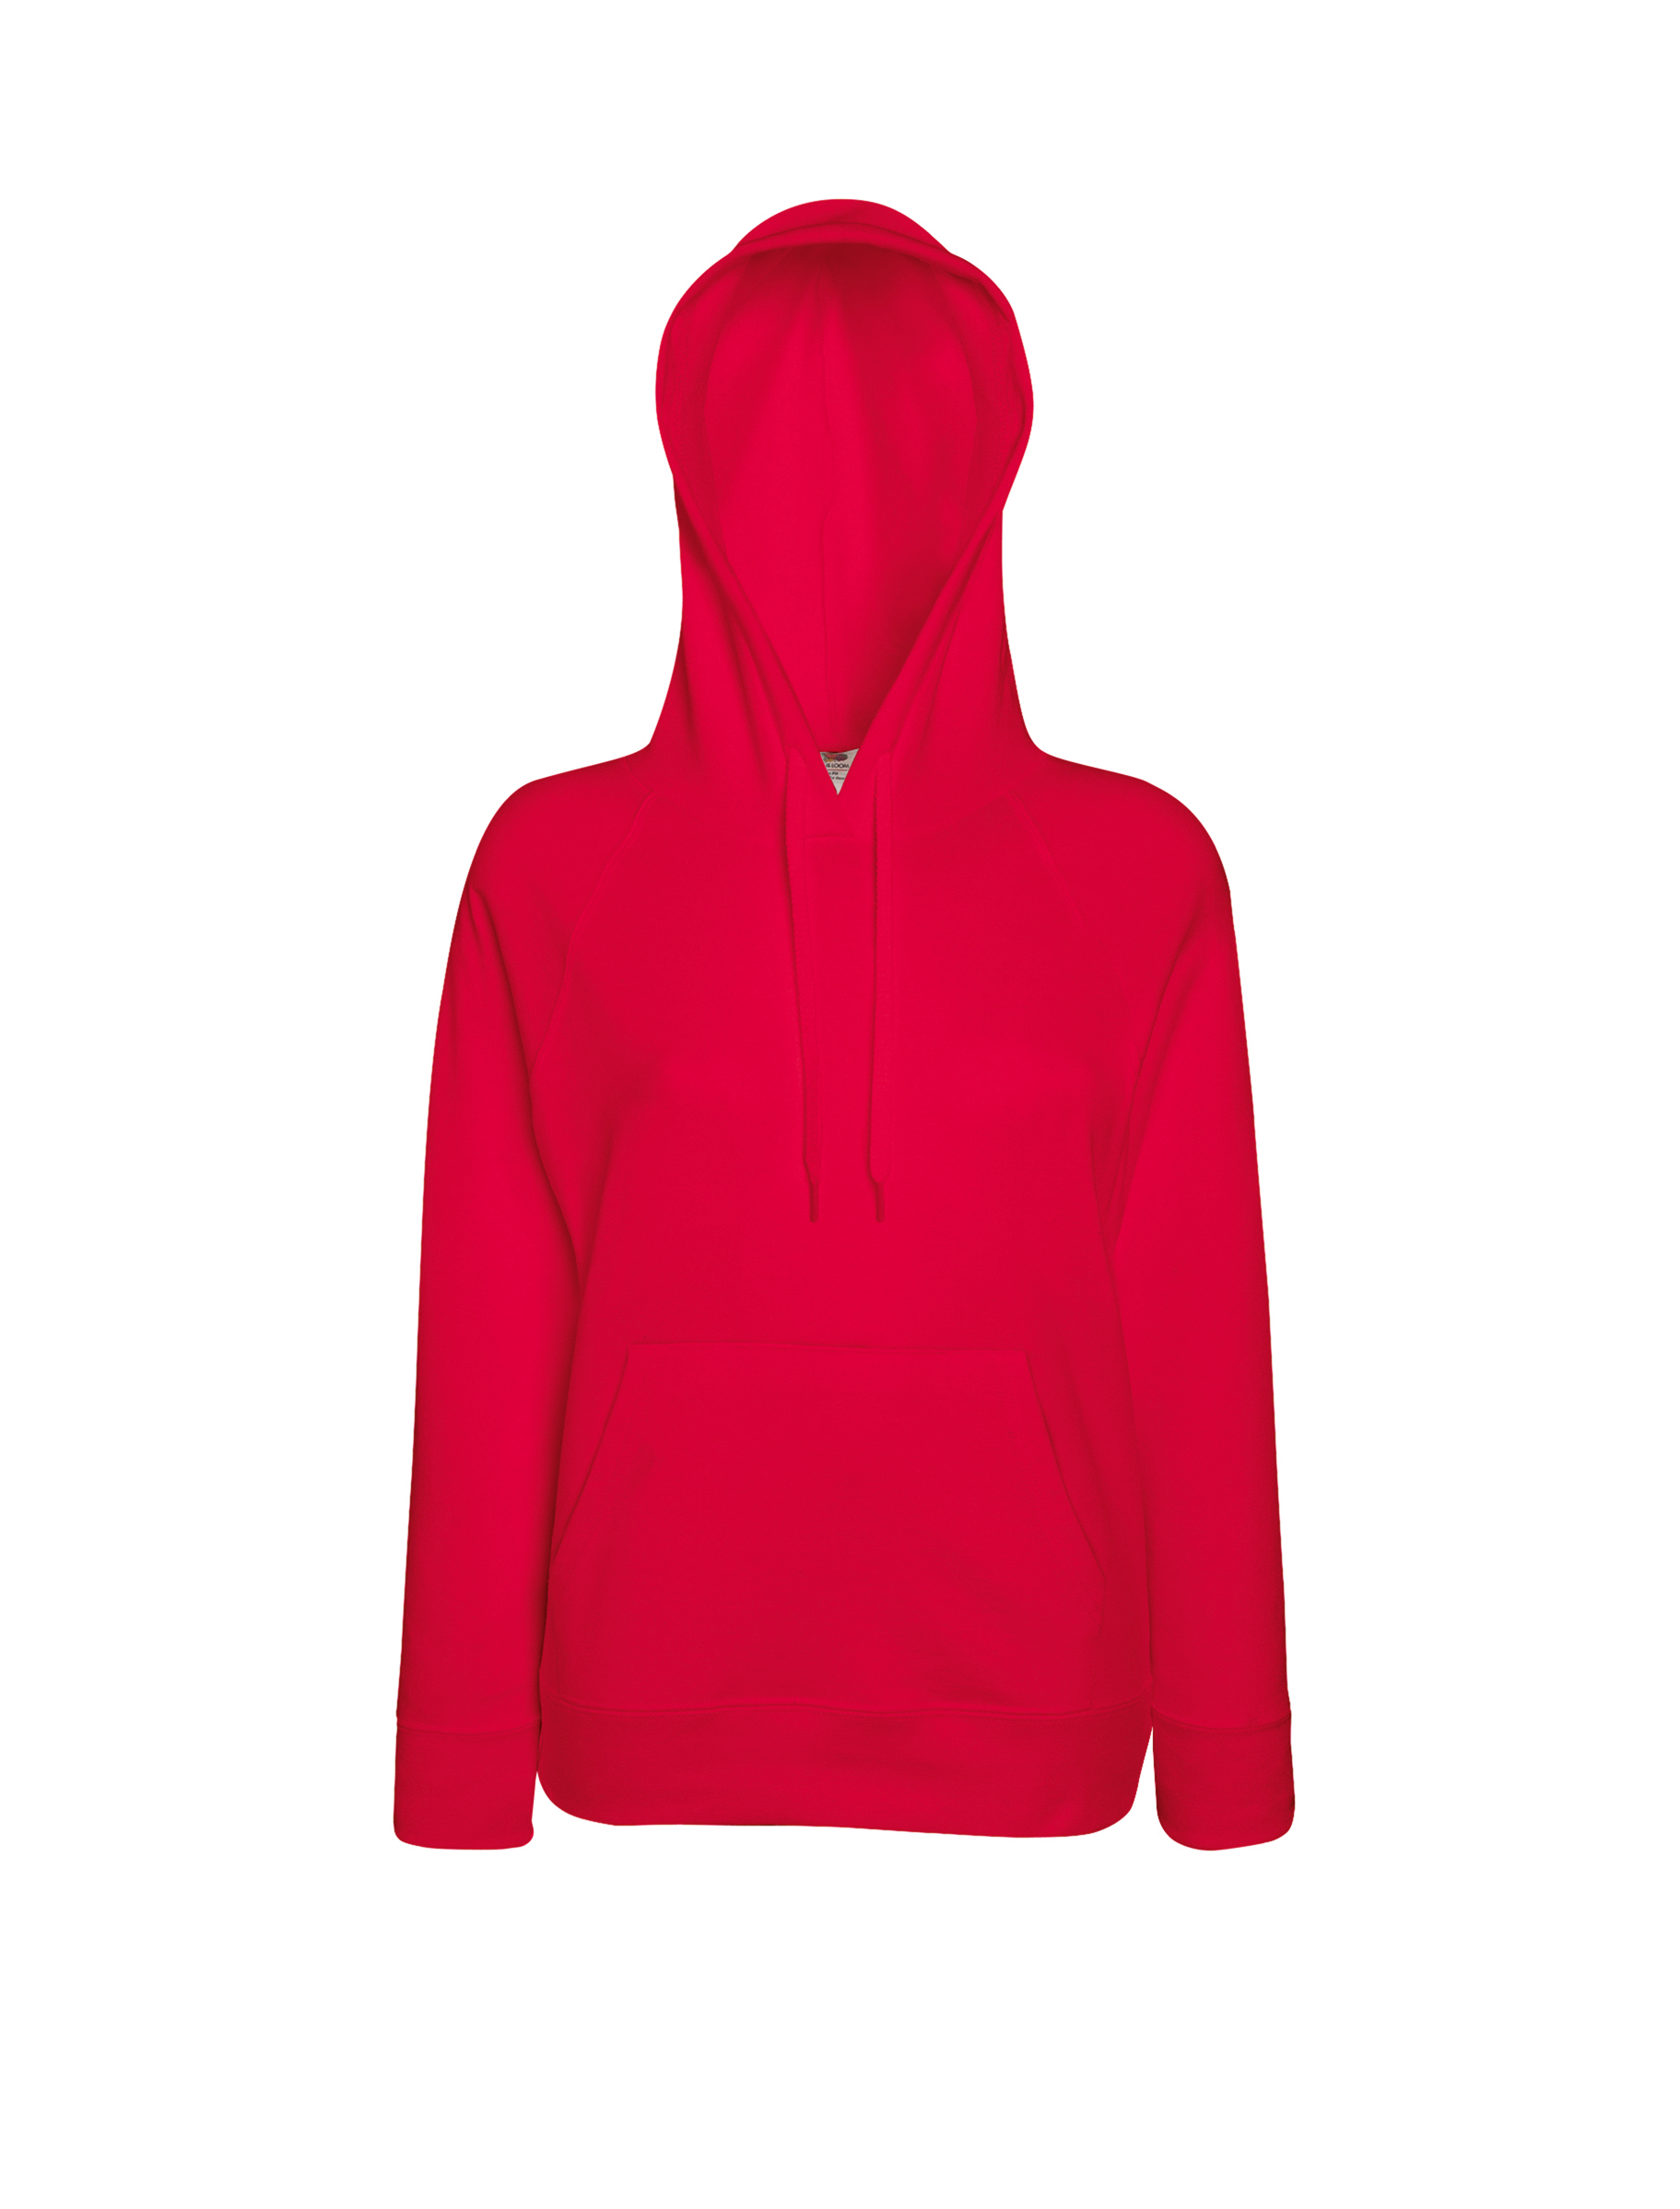 ax-httpswebsystems.s3.amazonaws.comtmp_for_downloadfruit-of-the-loom-womens-lightweight-hooded-sweatshirt-red.jpeg